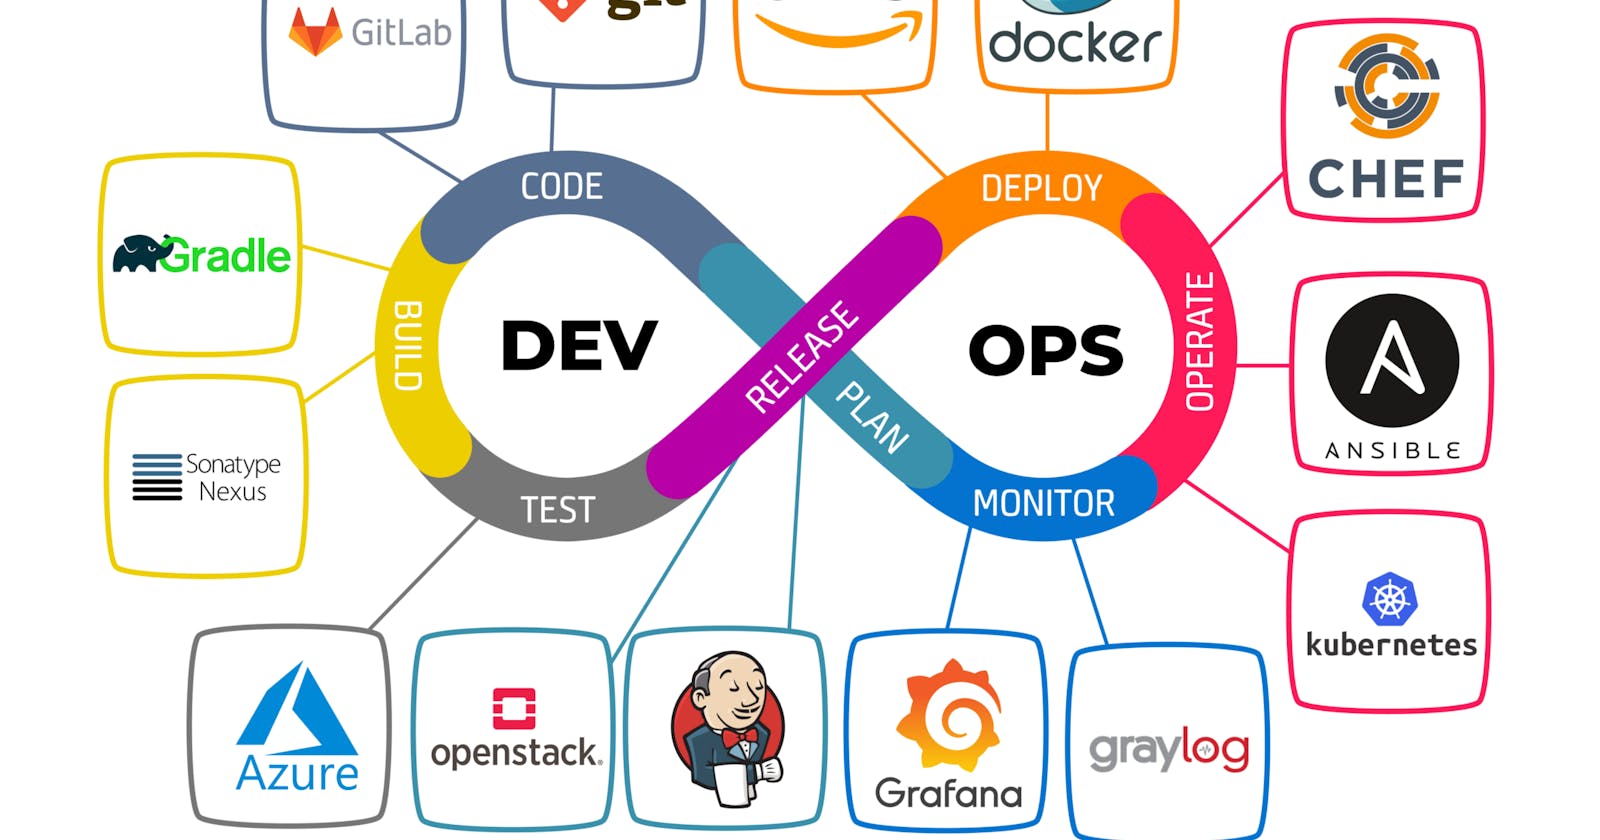 Mastering DevOps: The key to Faster, More Reliable Software Development